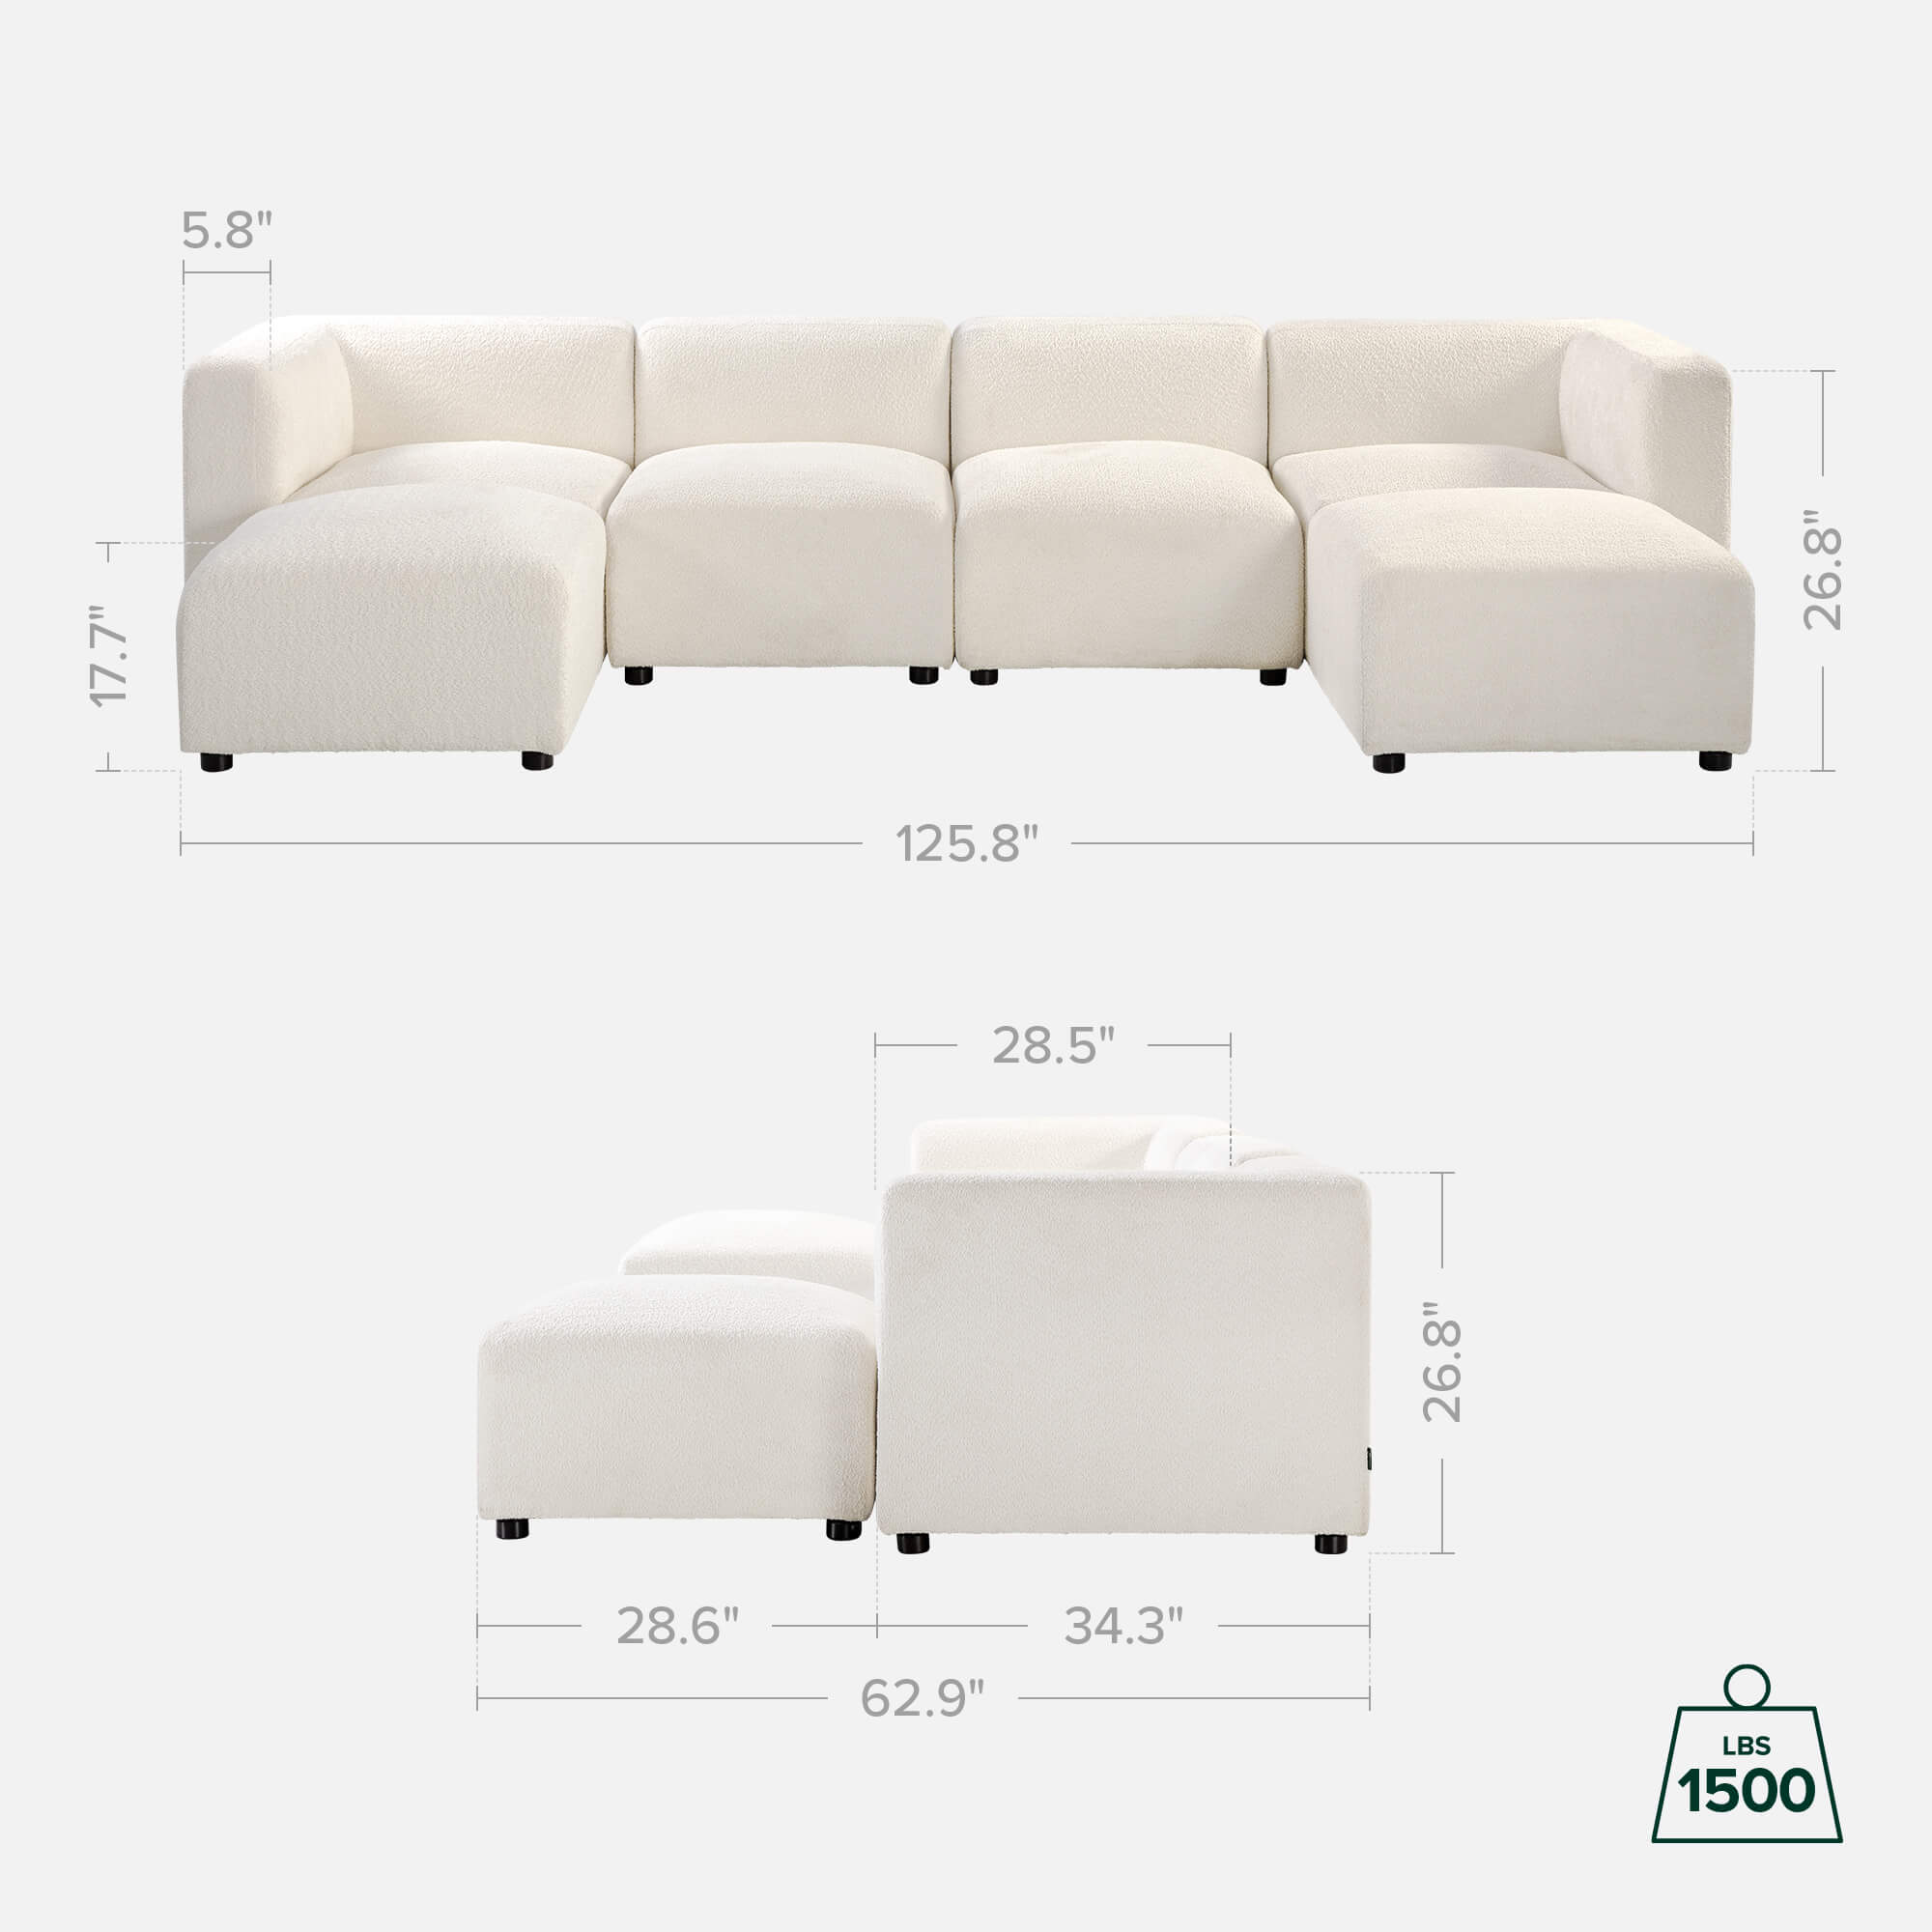 Measurement details for the Luca Double Chaise Sectional Sofa in boucle fabric